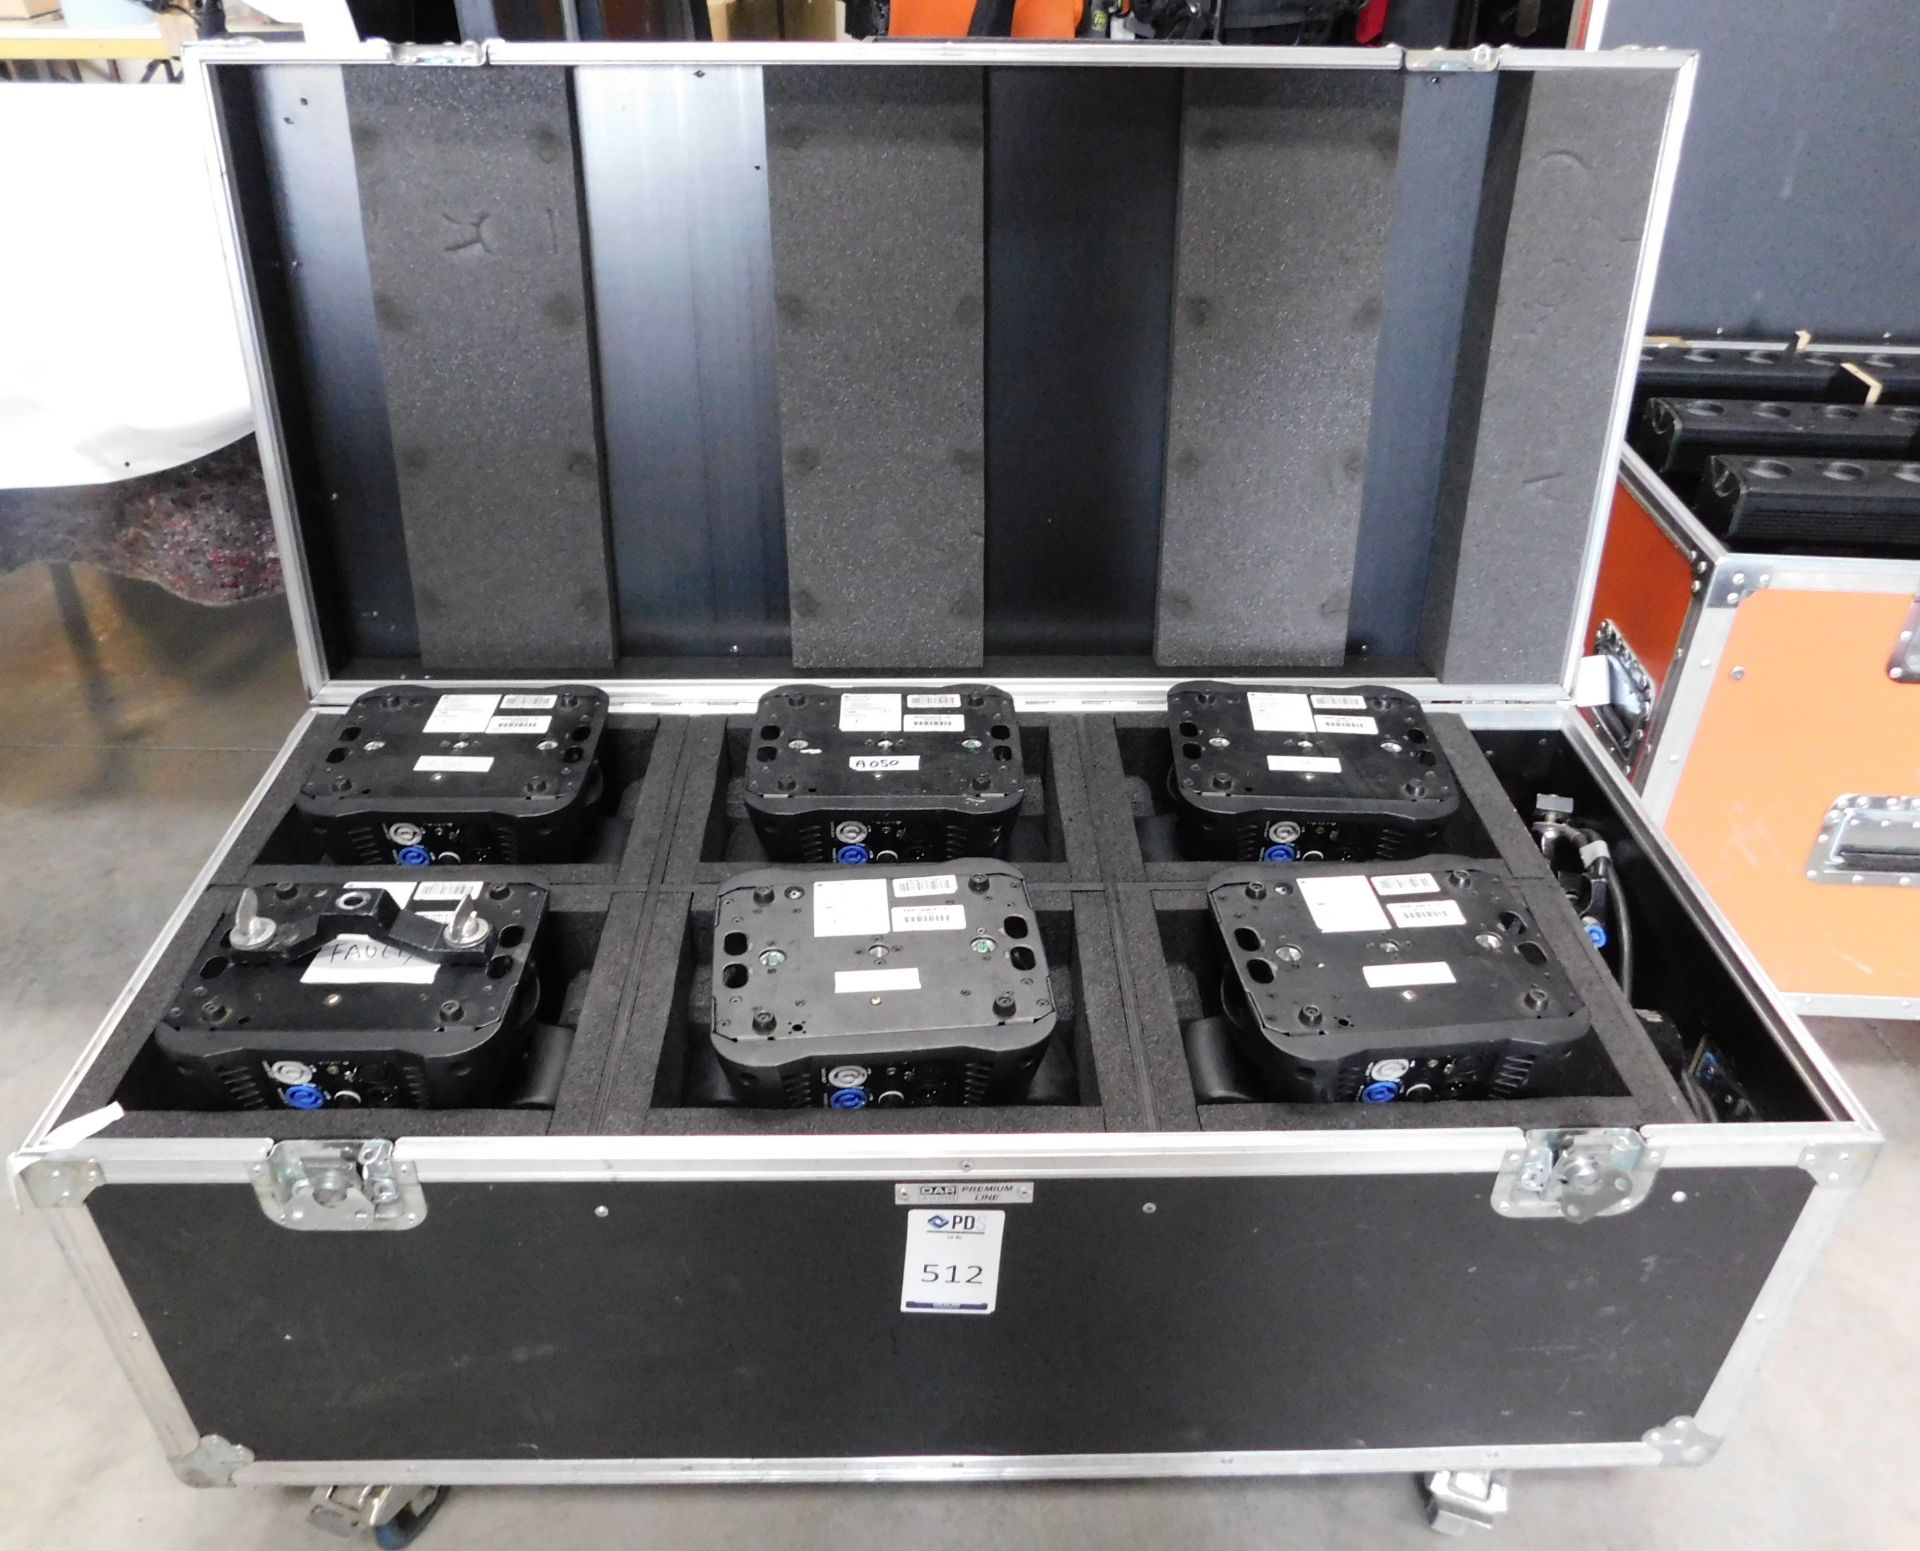 6 Showtec Infinity I1720z Moving Light Wash in Flight Case, (1 Faulty) (Location: Brentwood.